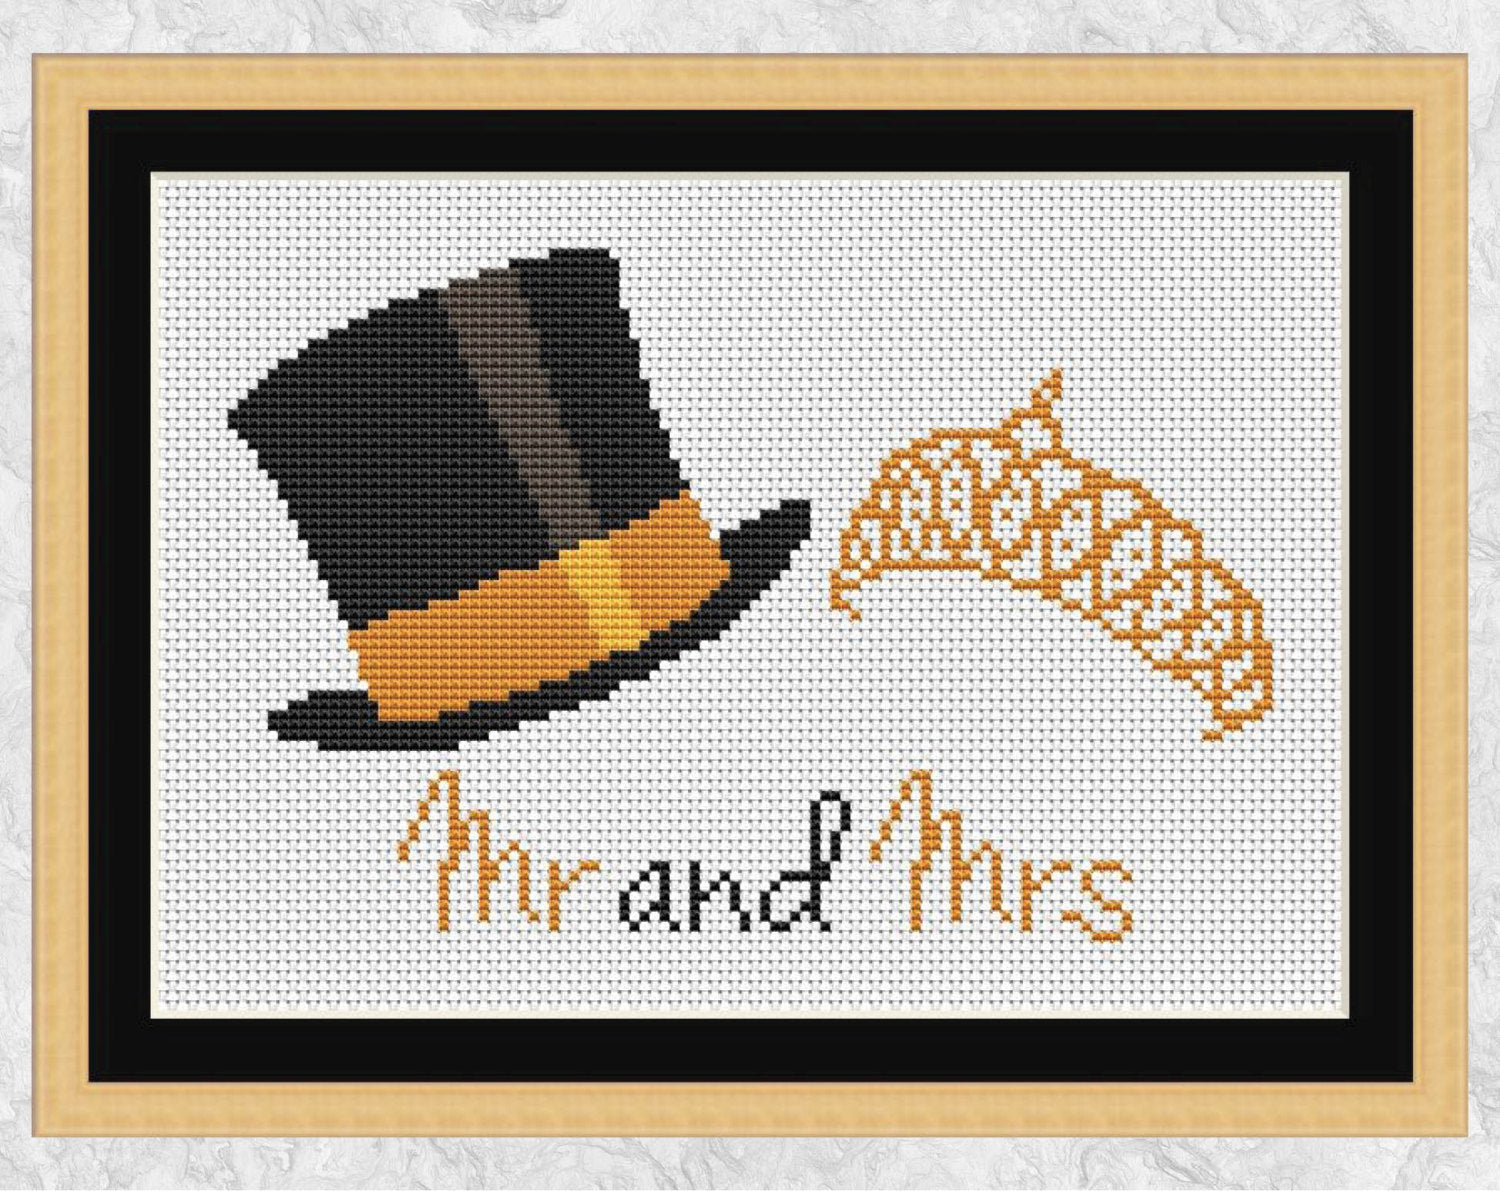 Wedding cross stitch pattern of a top hat and a tiara with "Mr and Mrs" written beneath it. Shown with frame.